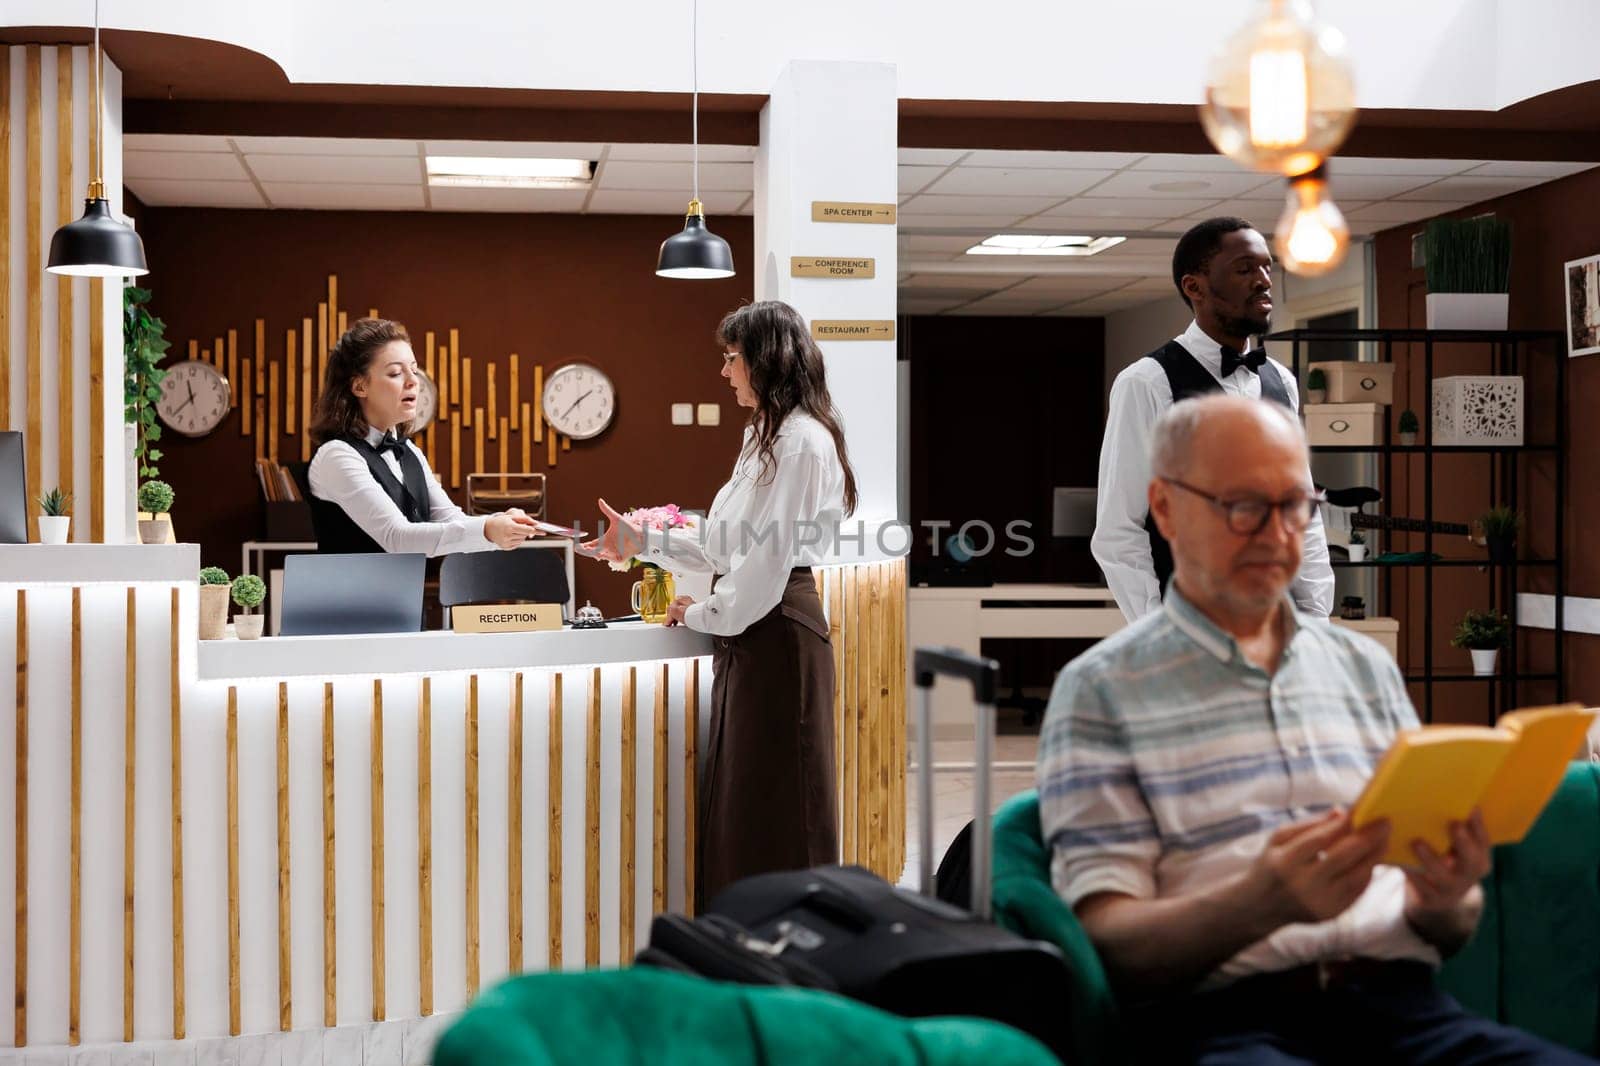 Senior caucasian woman standing at hotel lobby counter and checks in with passport. Female concierge at registration desk returning personal document of elderly lady traveler after verfiying identity.